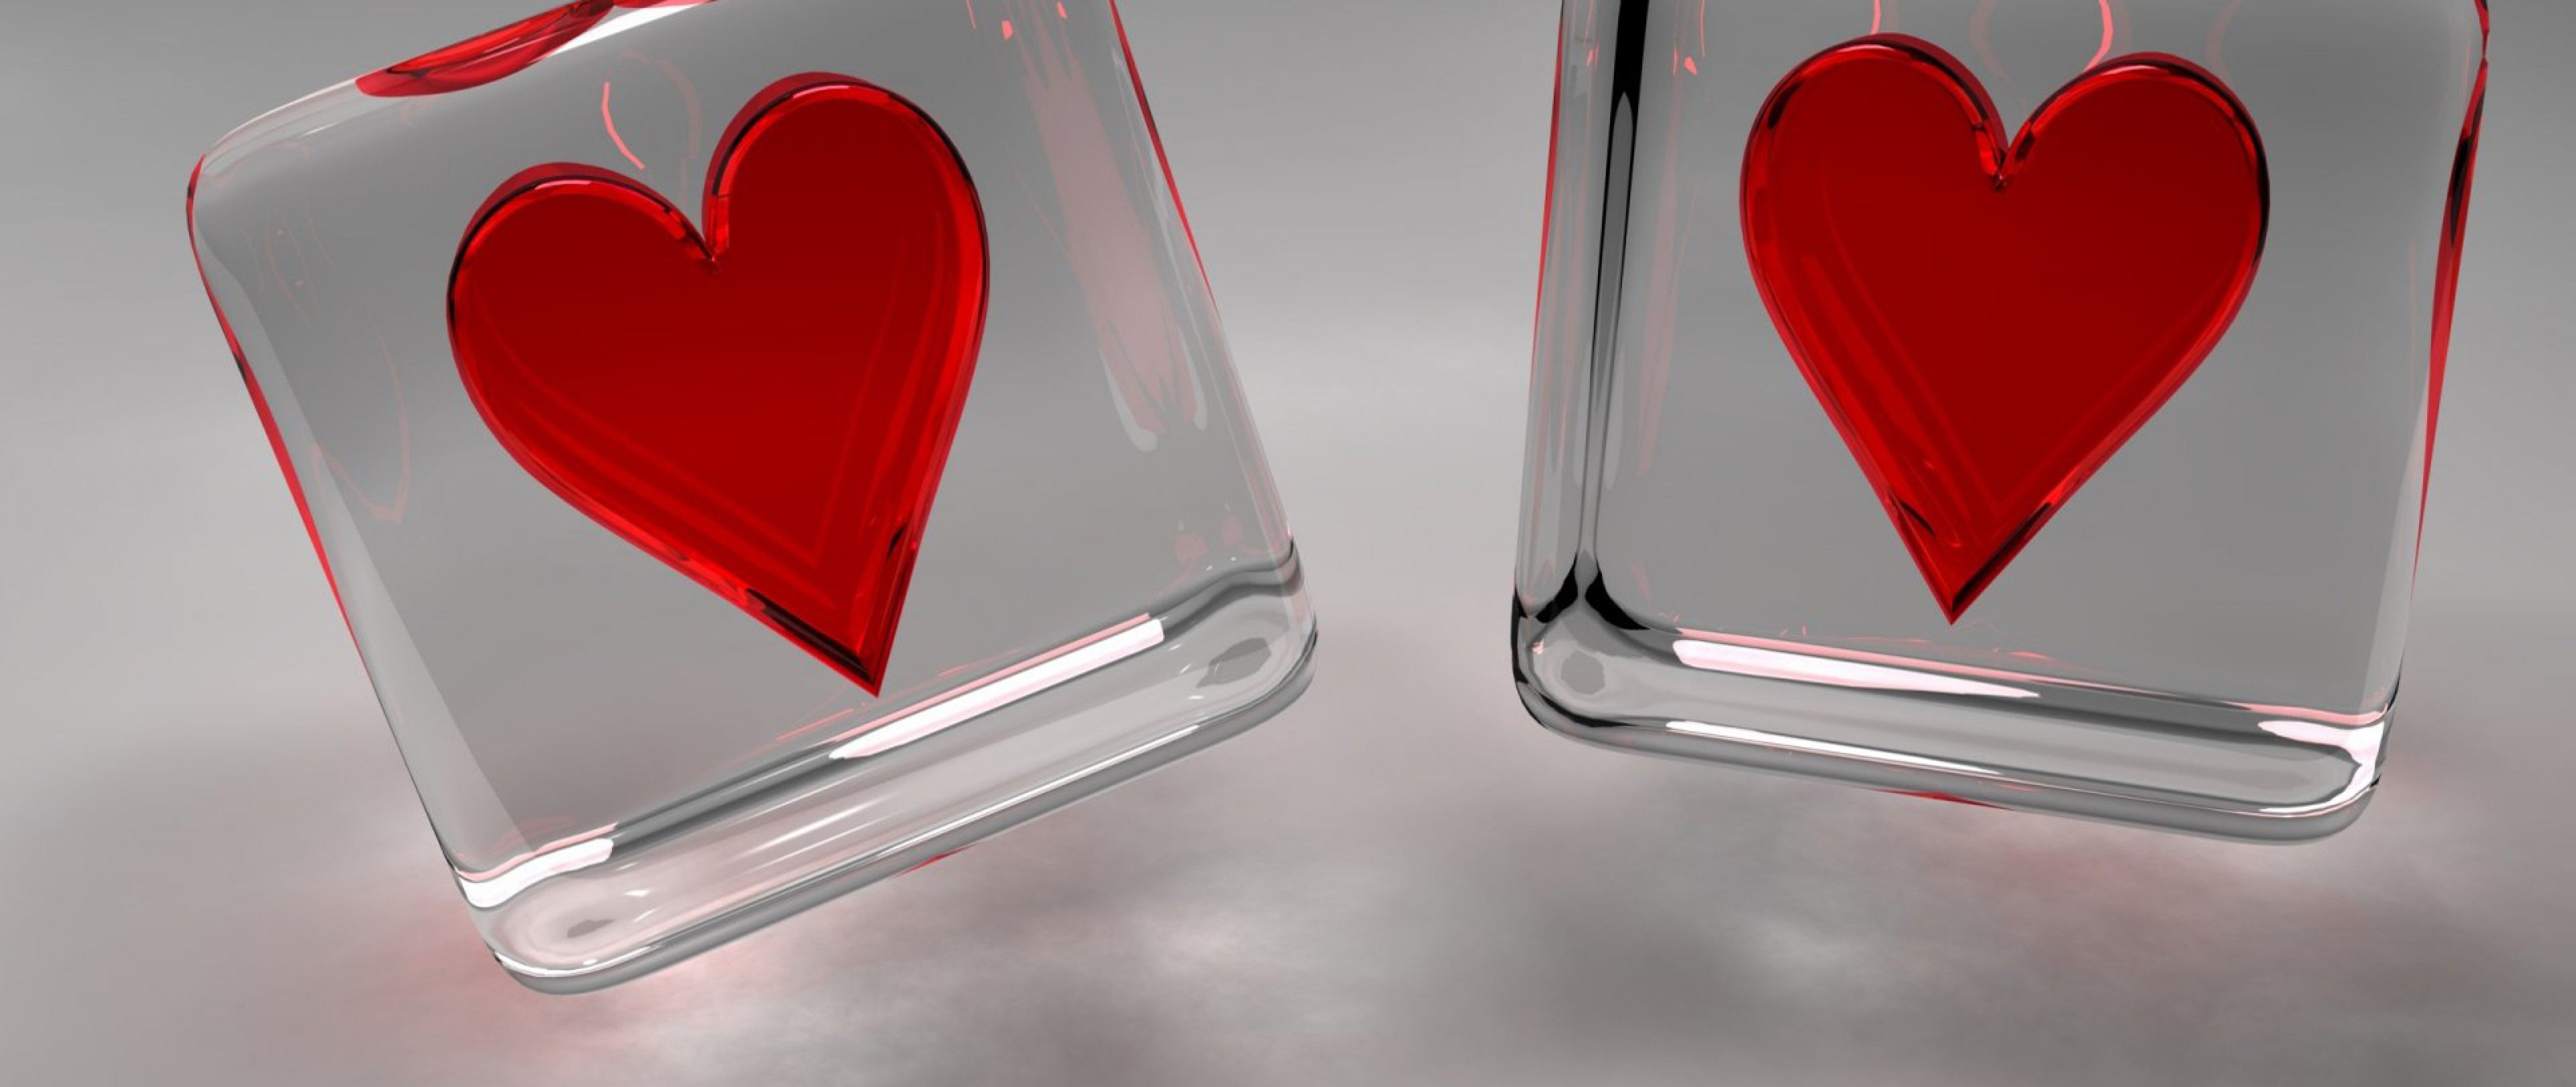 Download Free Love Heart Cubes Live HD Wallpaper for Desktop and Mobiles 4K Ultra HD Wide TV